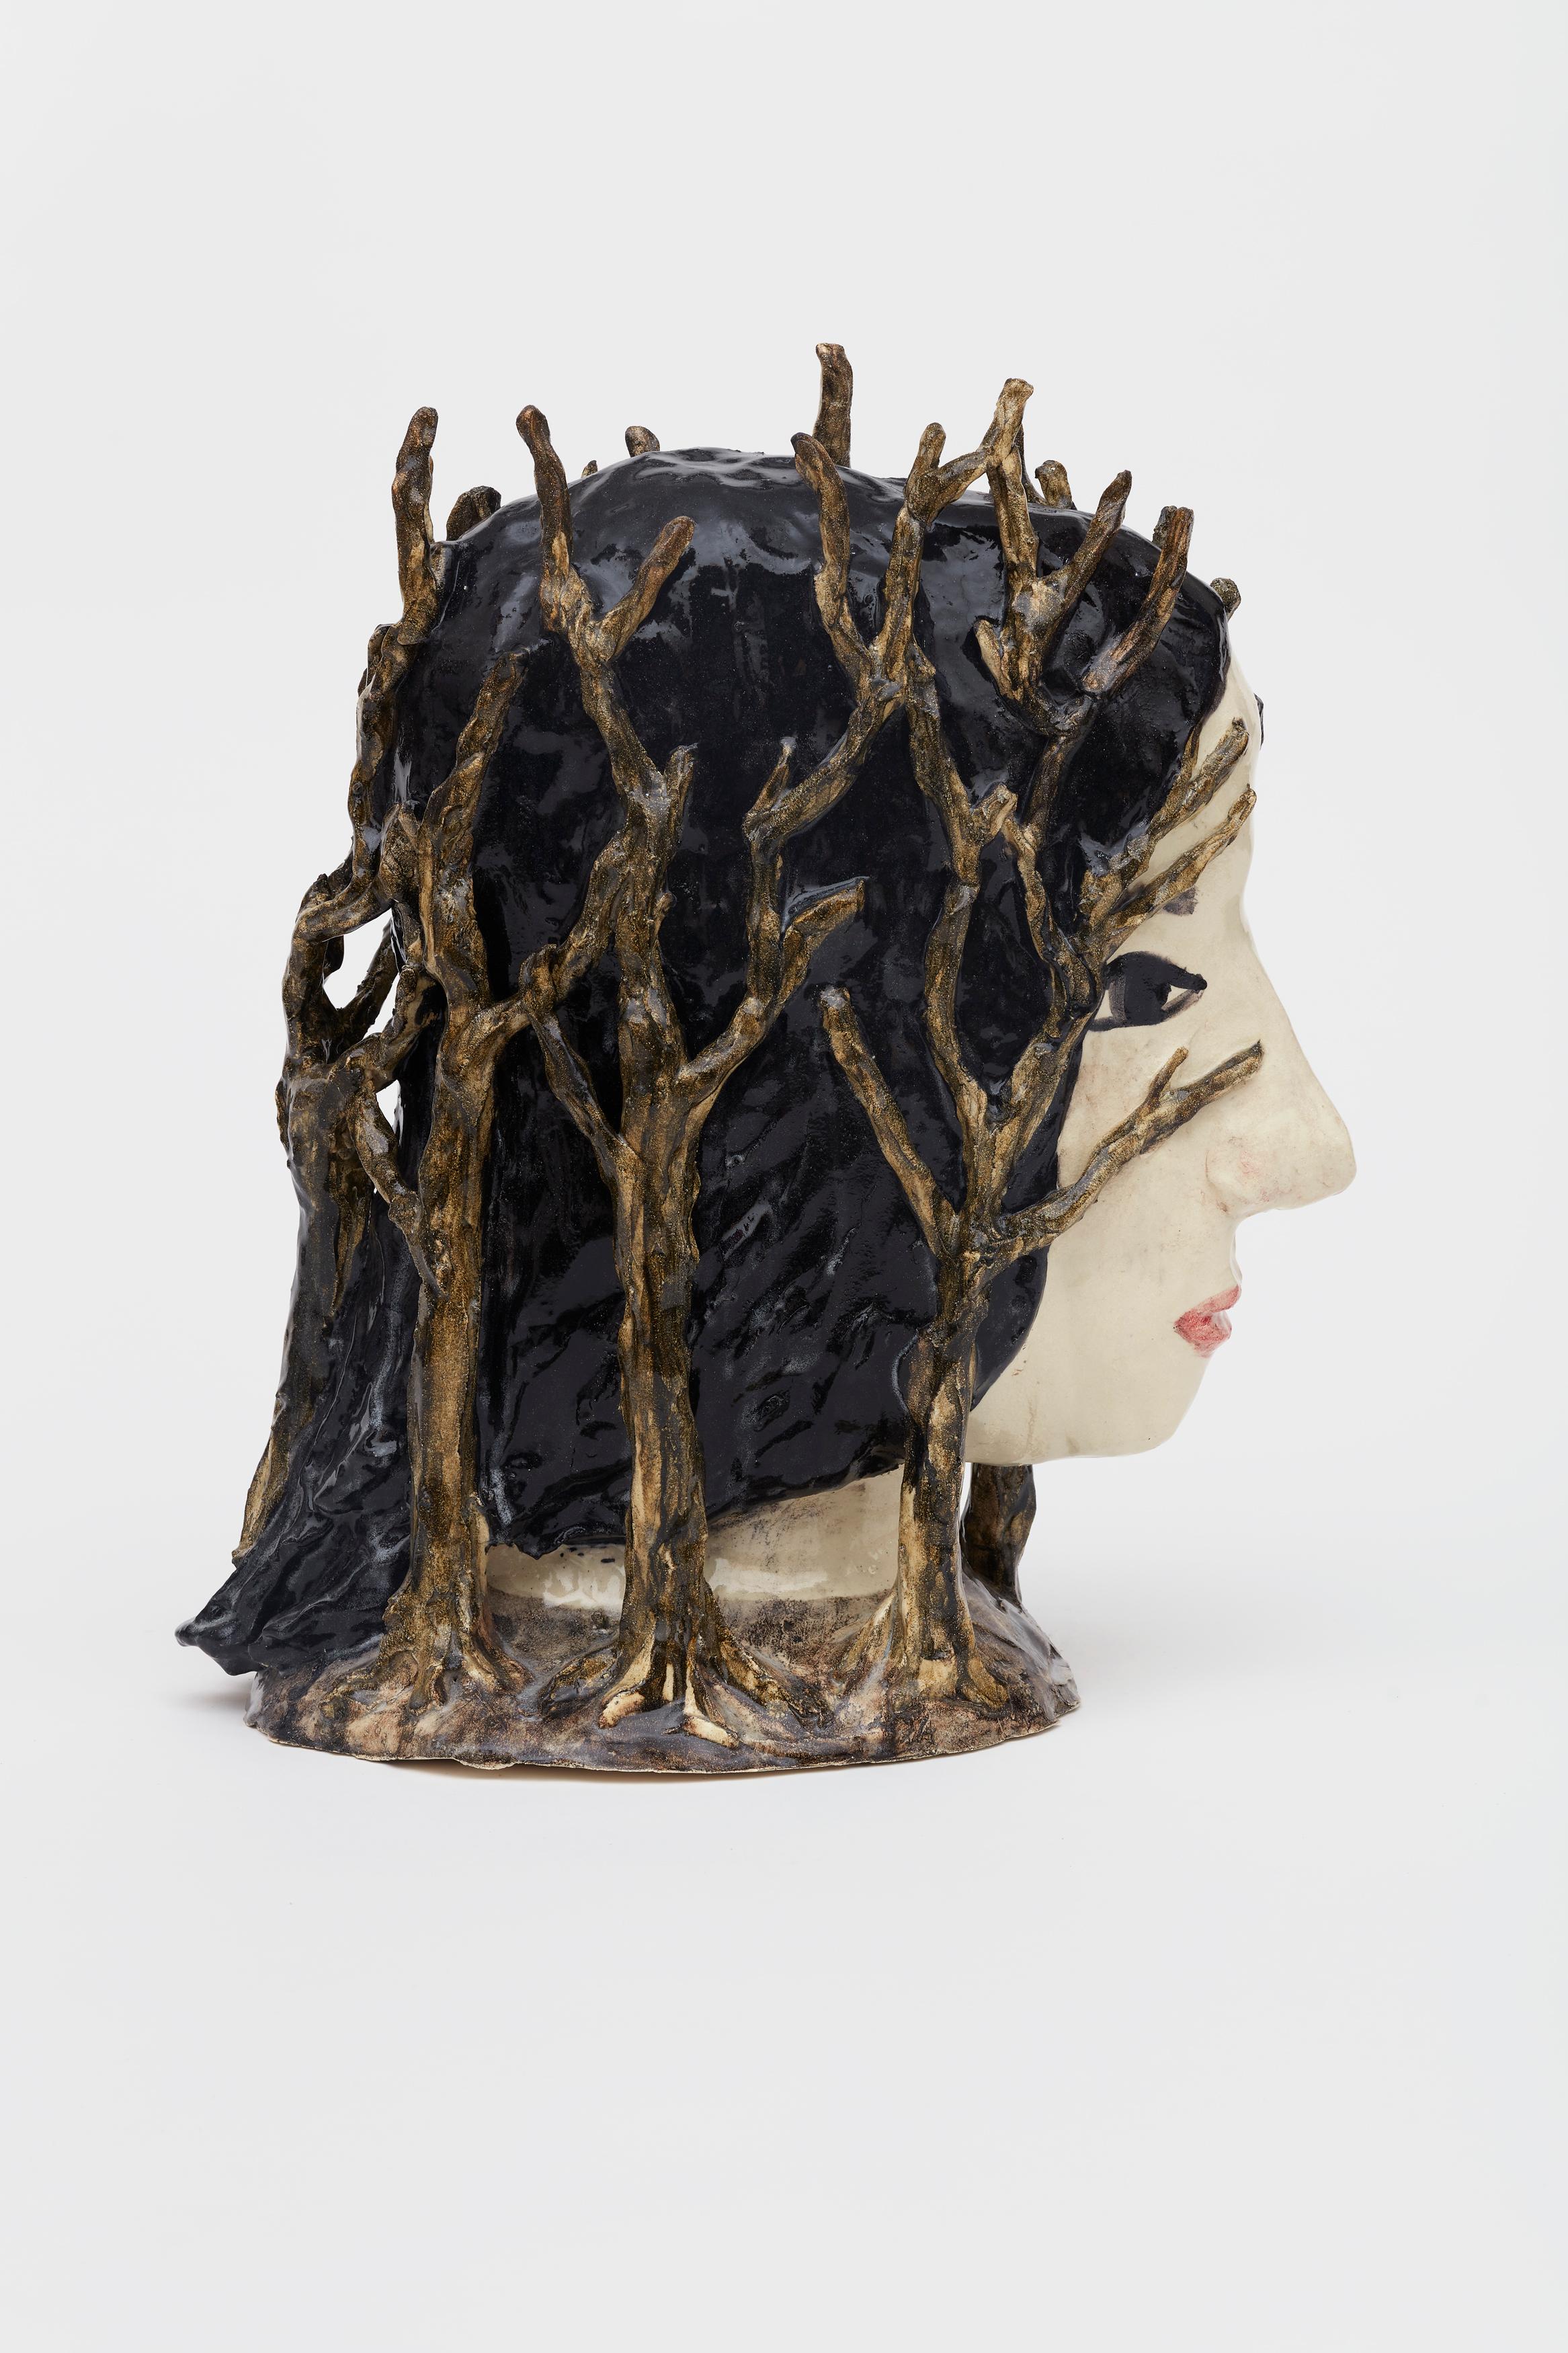 Kristalova is best known for her figurative ceramic sculptures that incorporate aspects of the human body and elements of nature. Across her oeuvre, she explores transition as a stage essential to both human and ecological life. Crafted in the